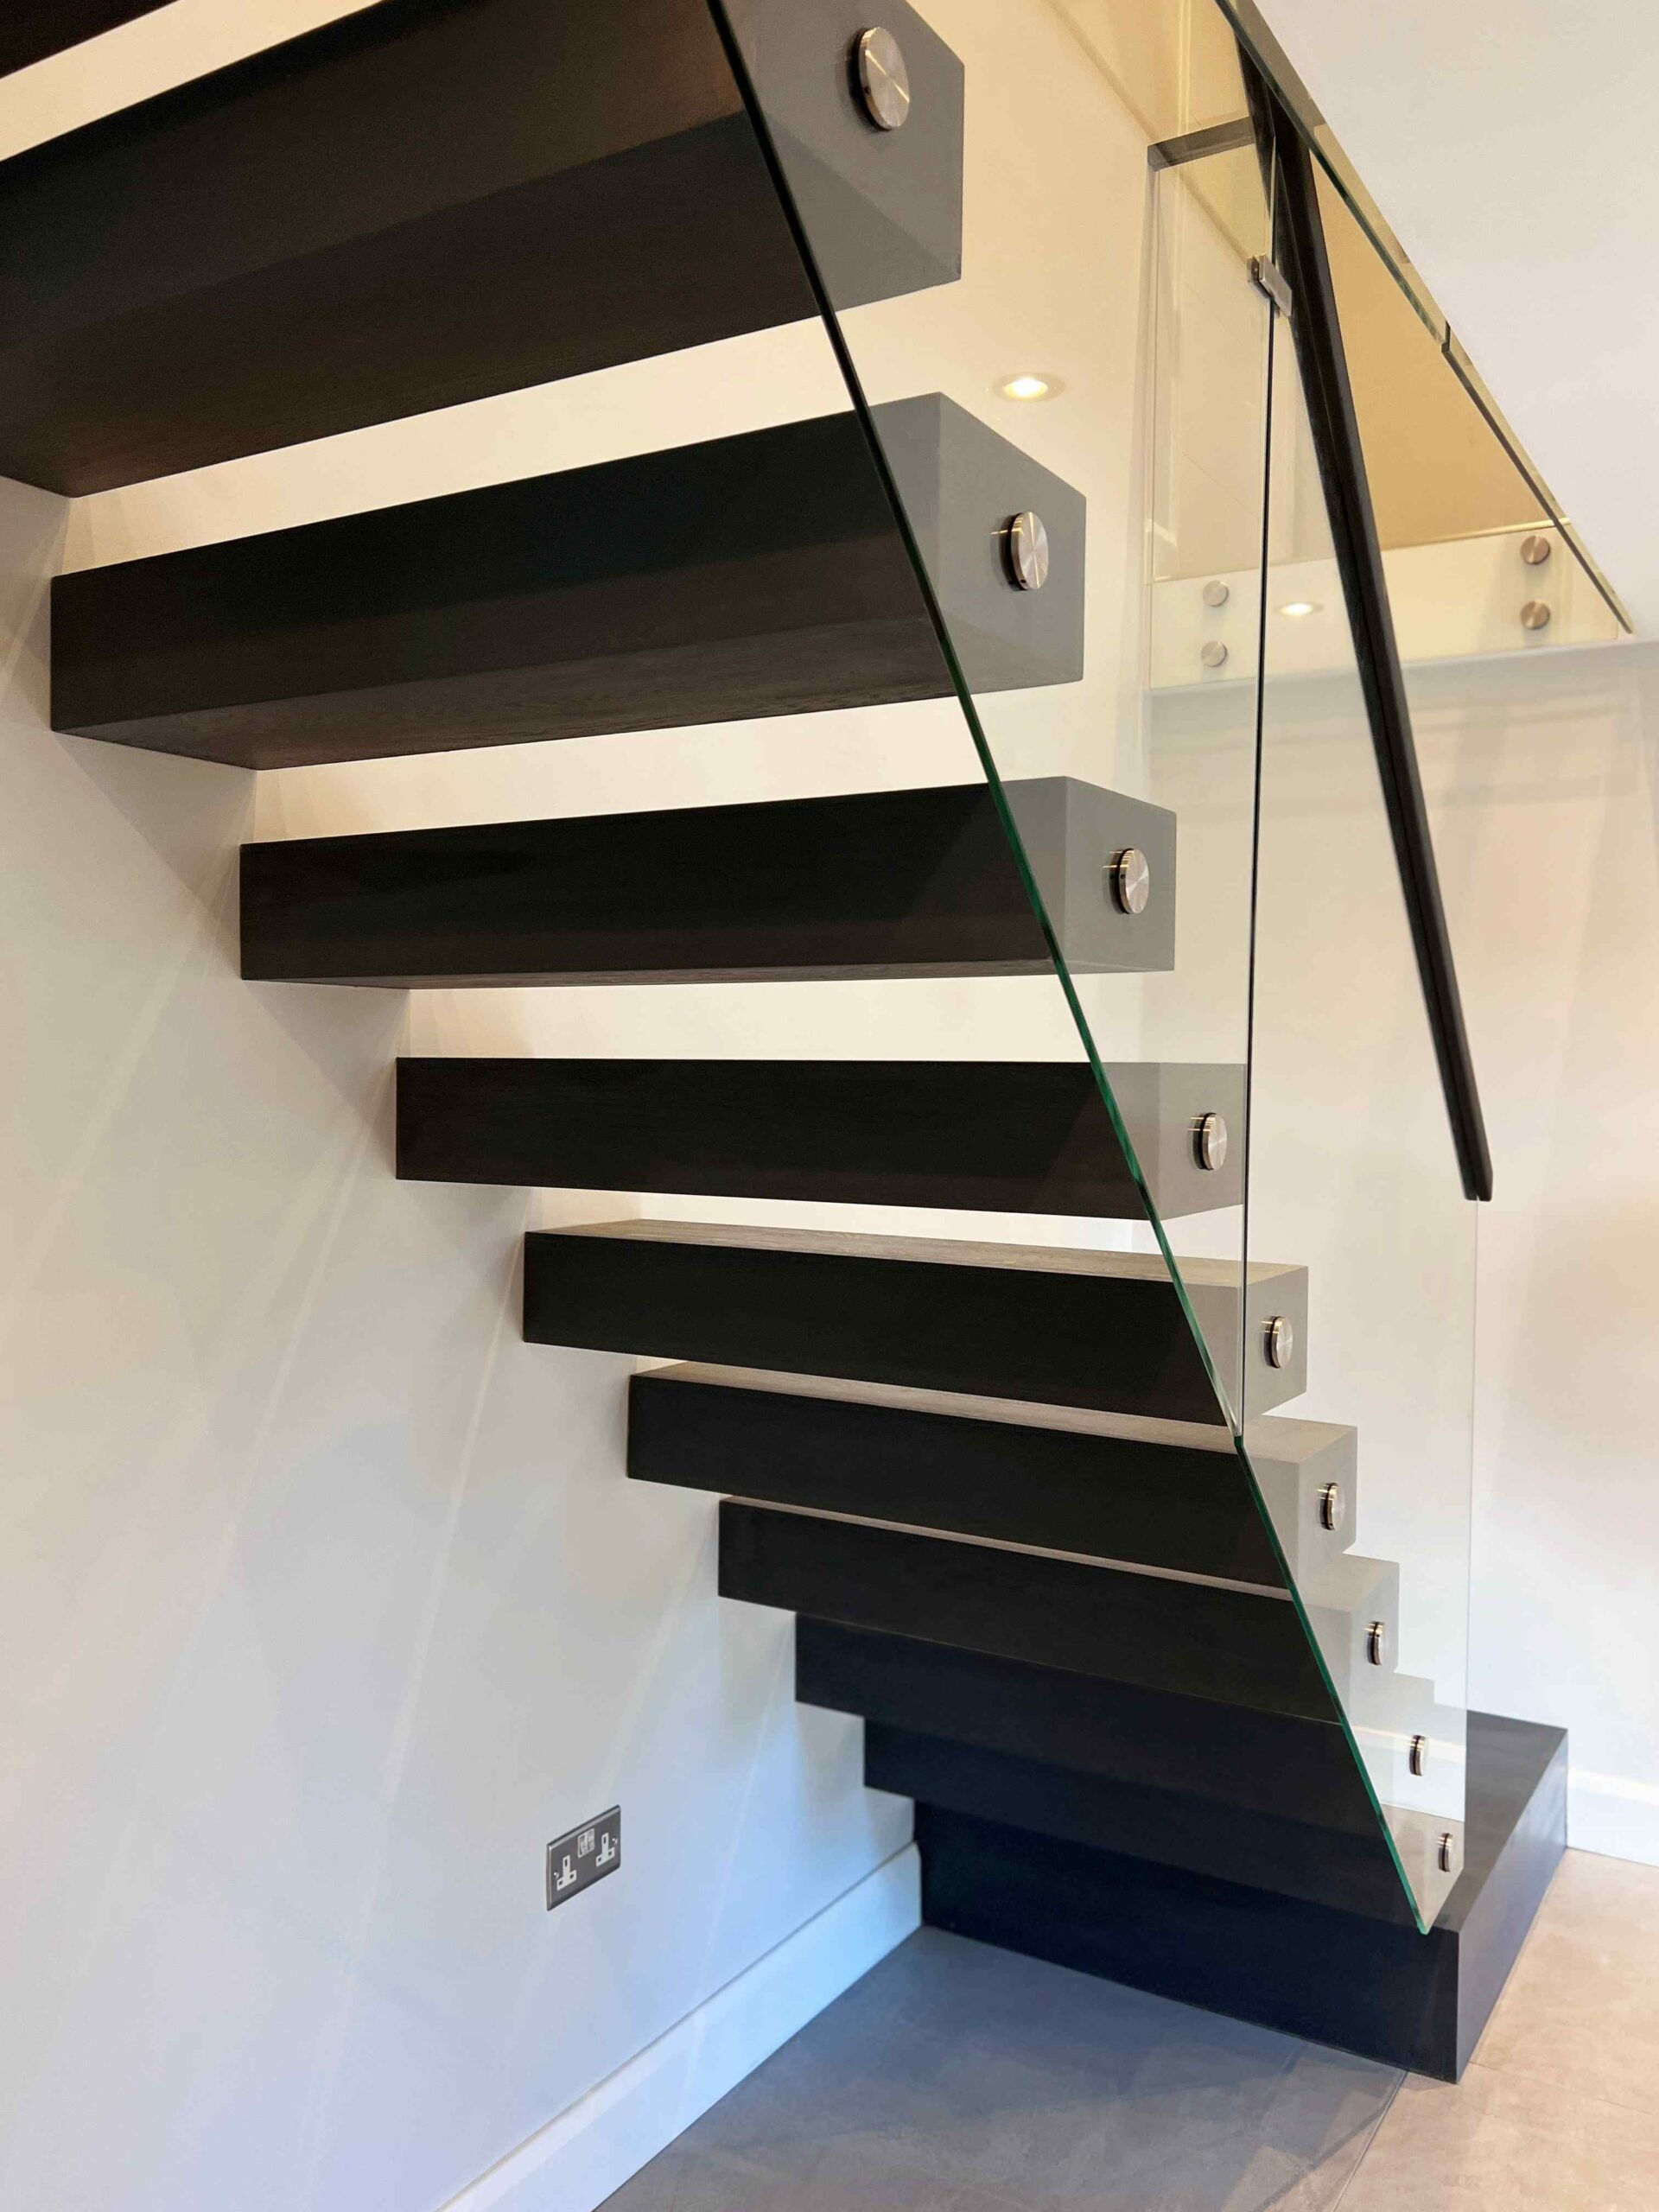 Back view of a floating staircase